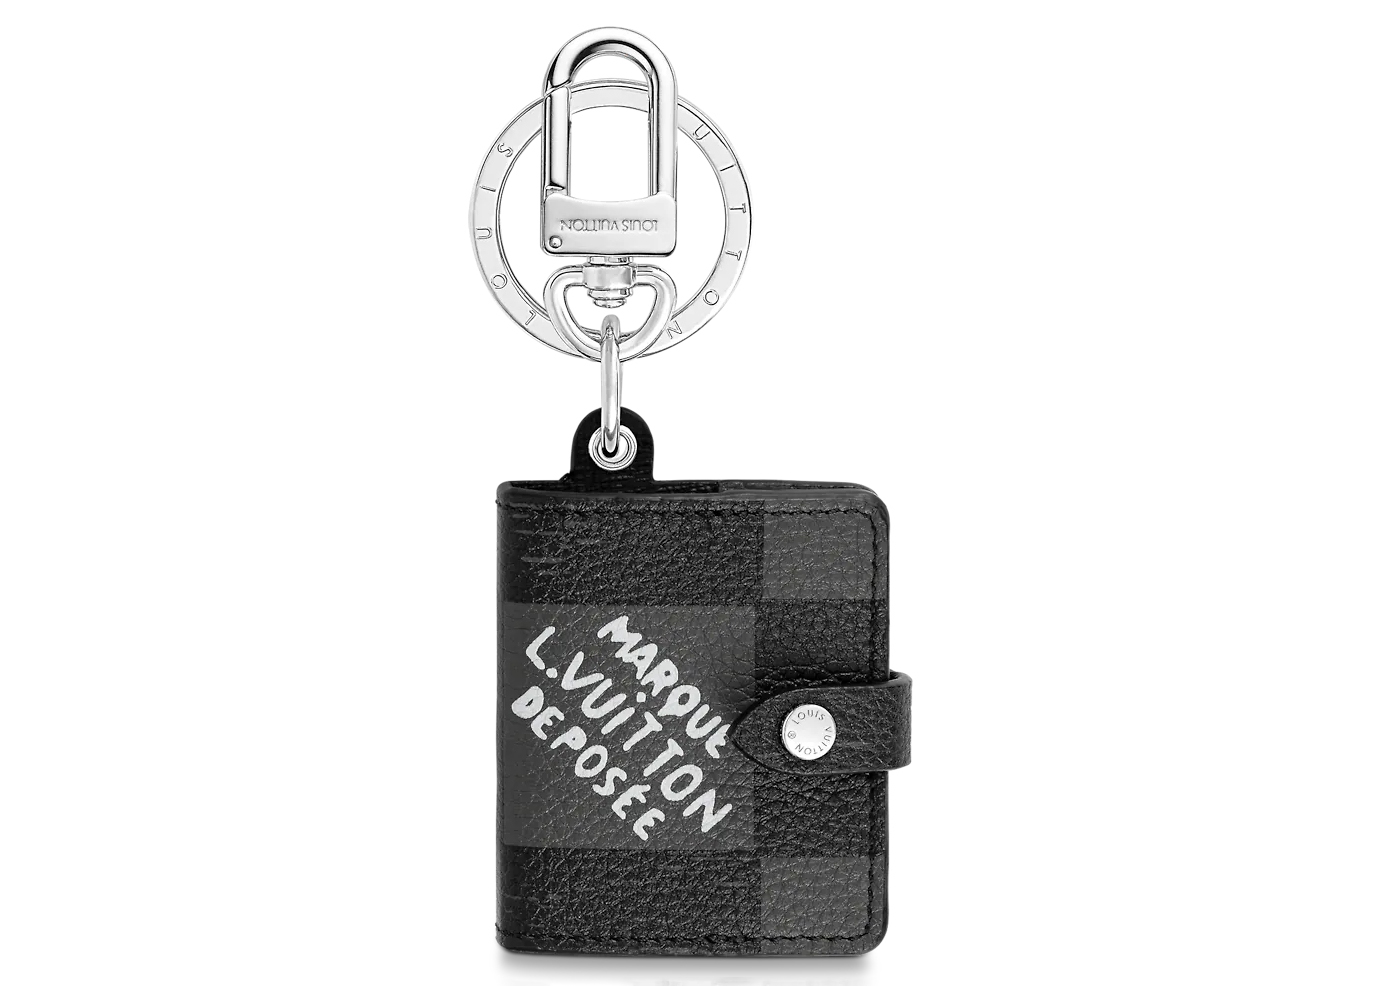 Louis Vuitton Damier Archives Notebook Bag and Charm Key Holder